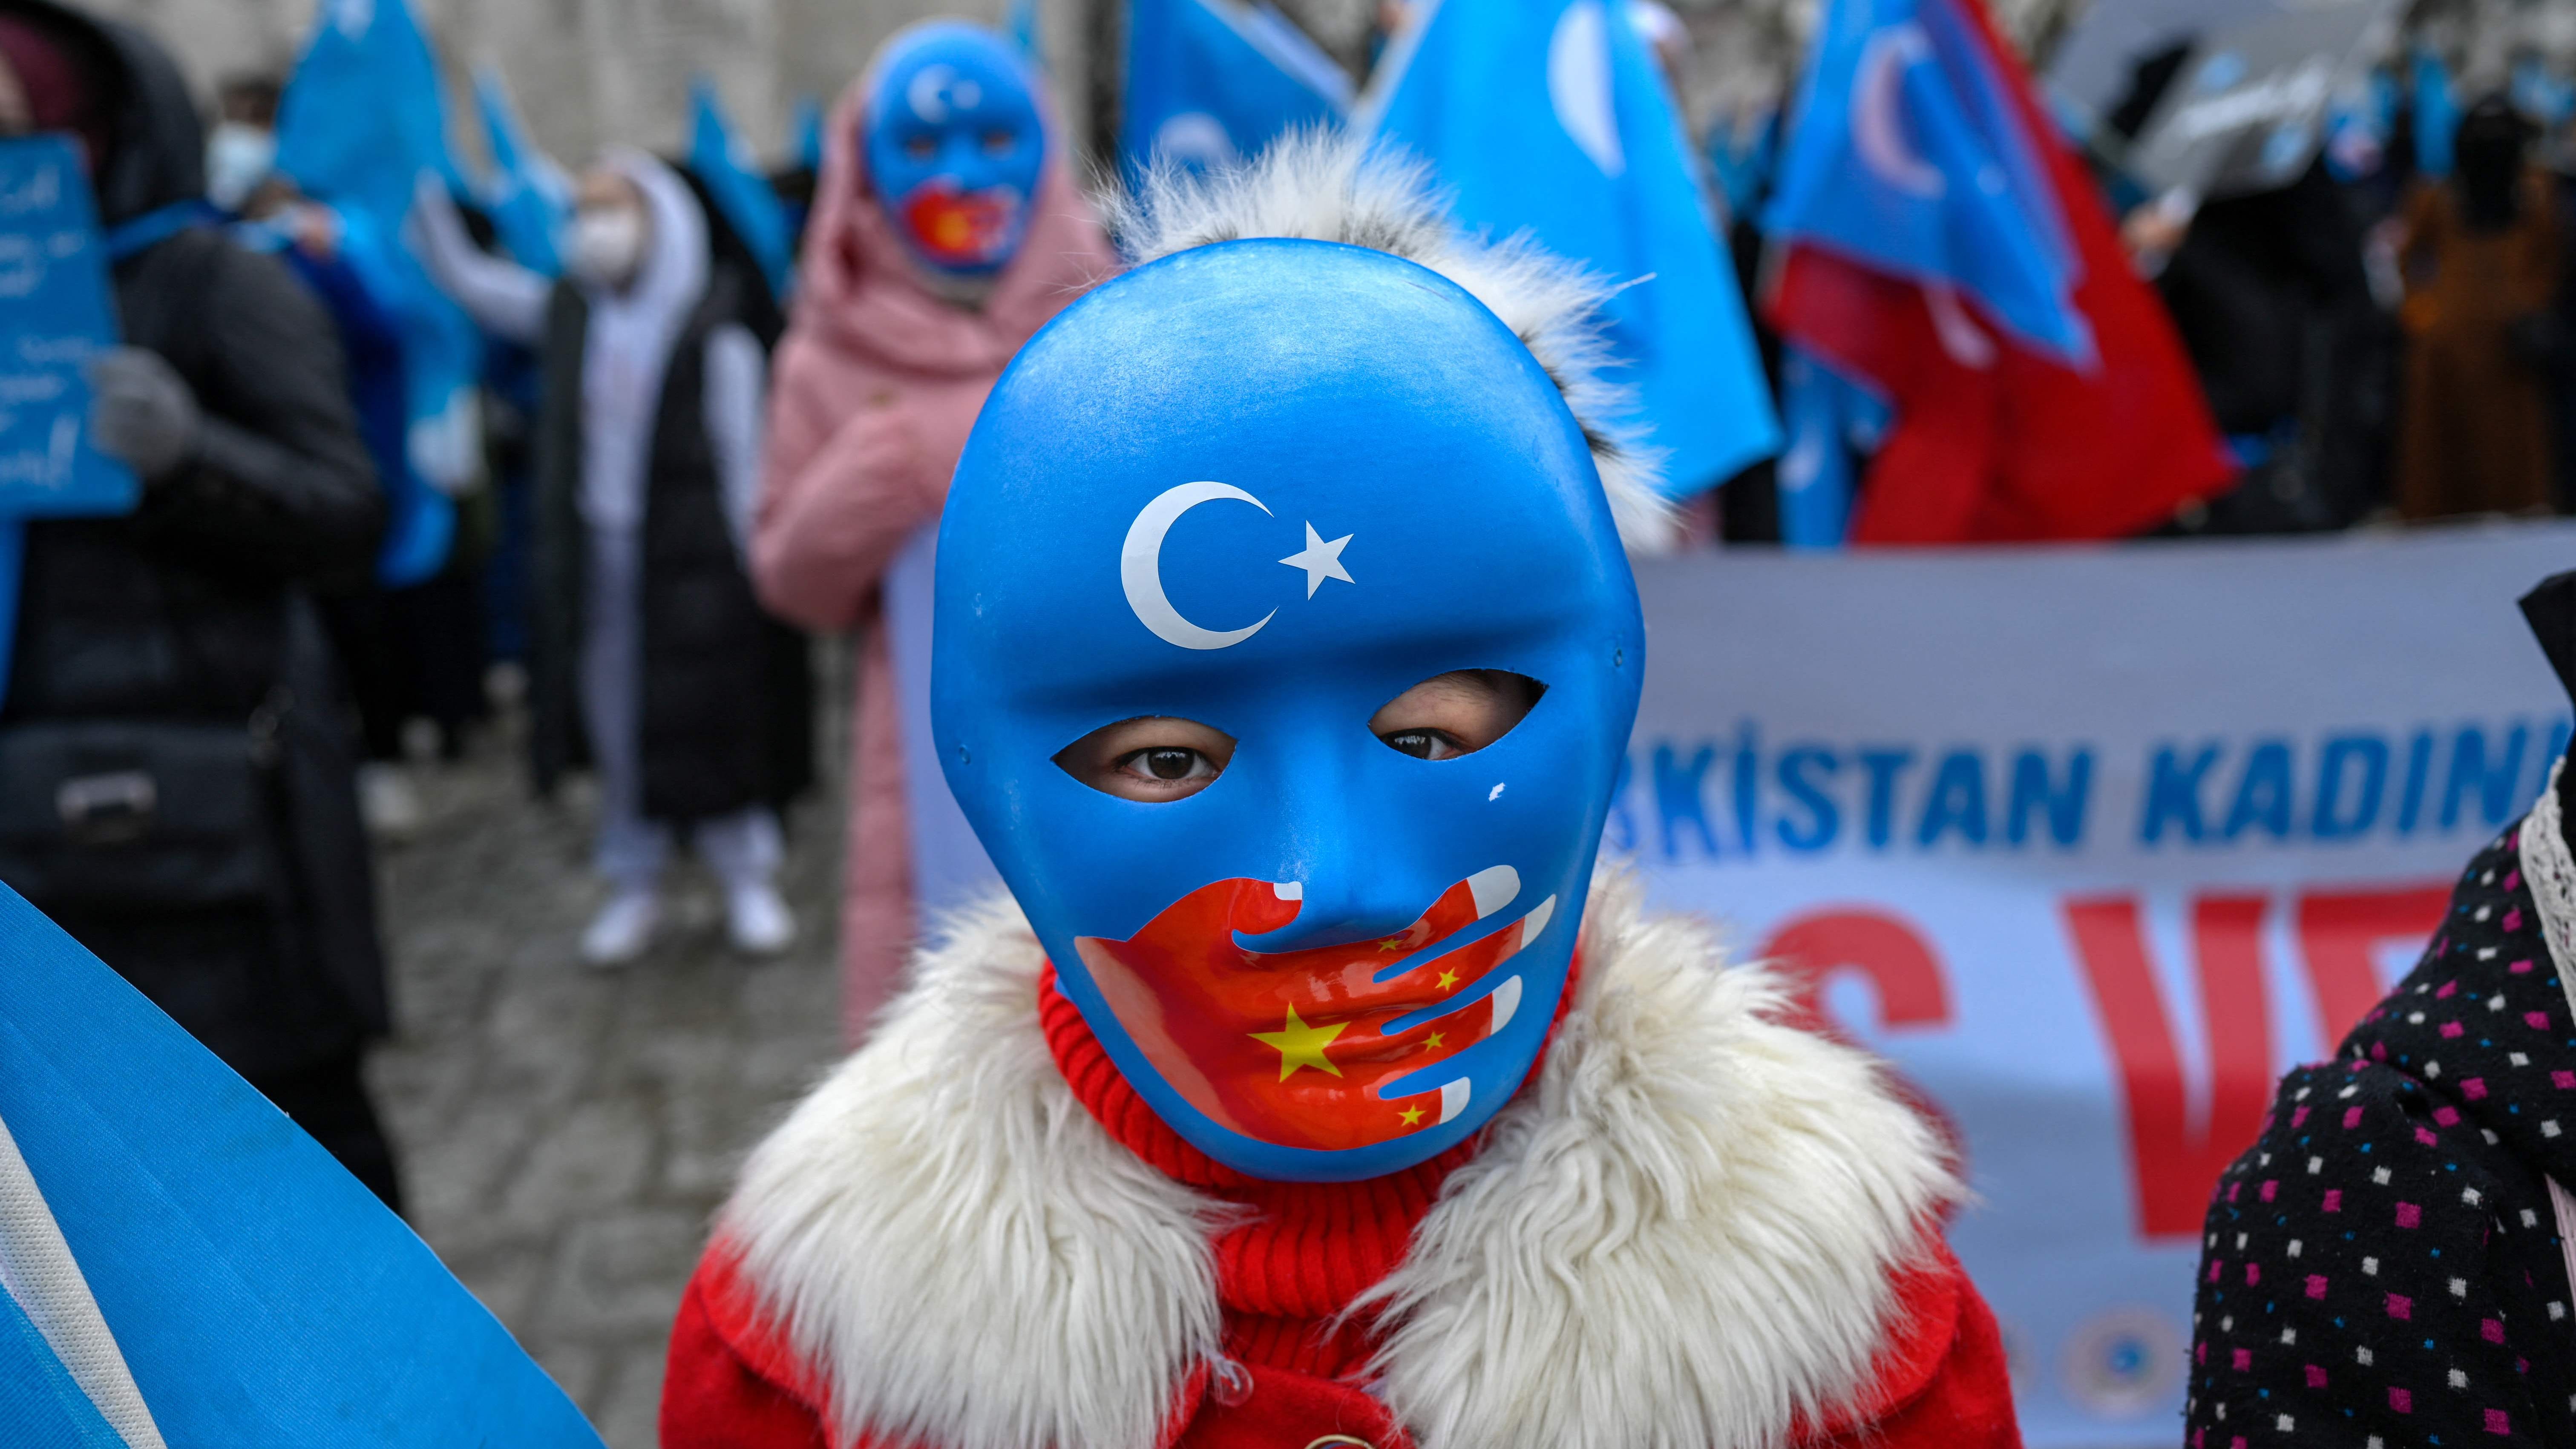 US says China is committing genocide. What we know about the Uyghurs.